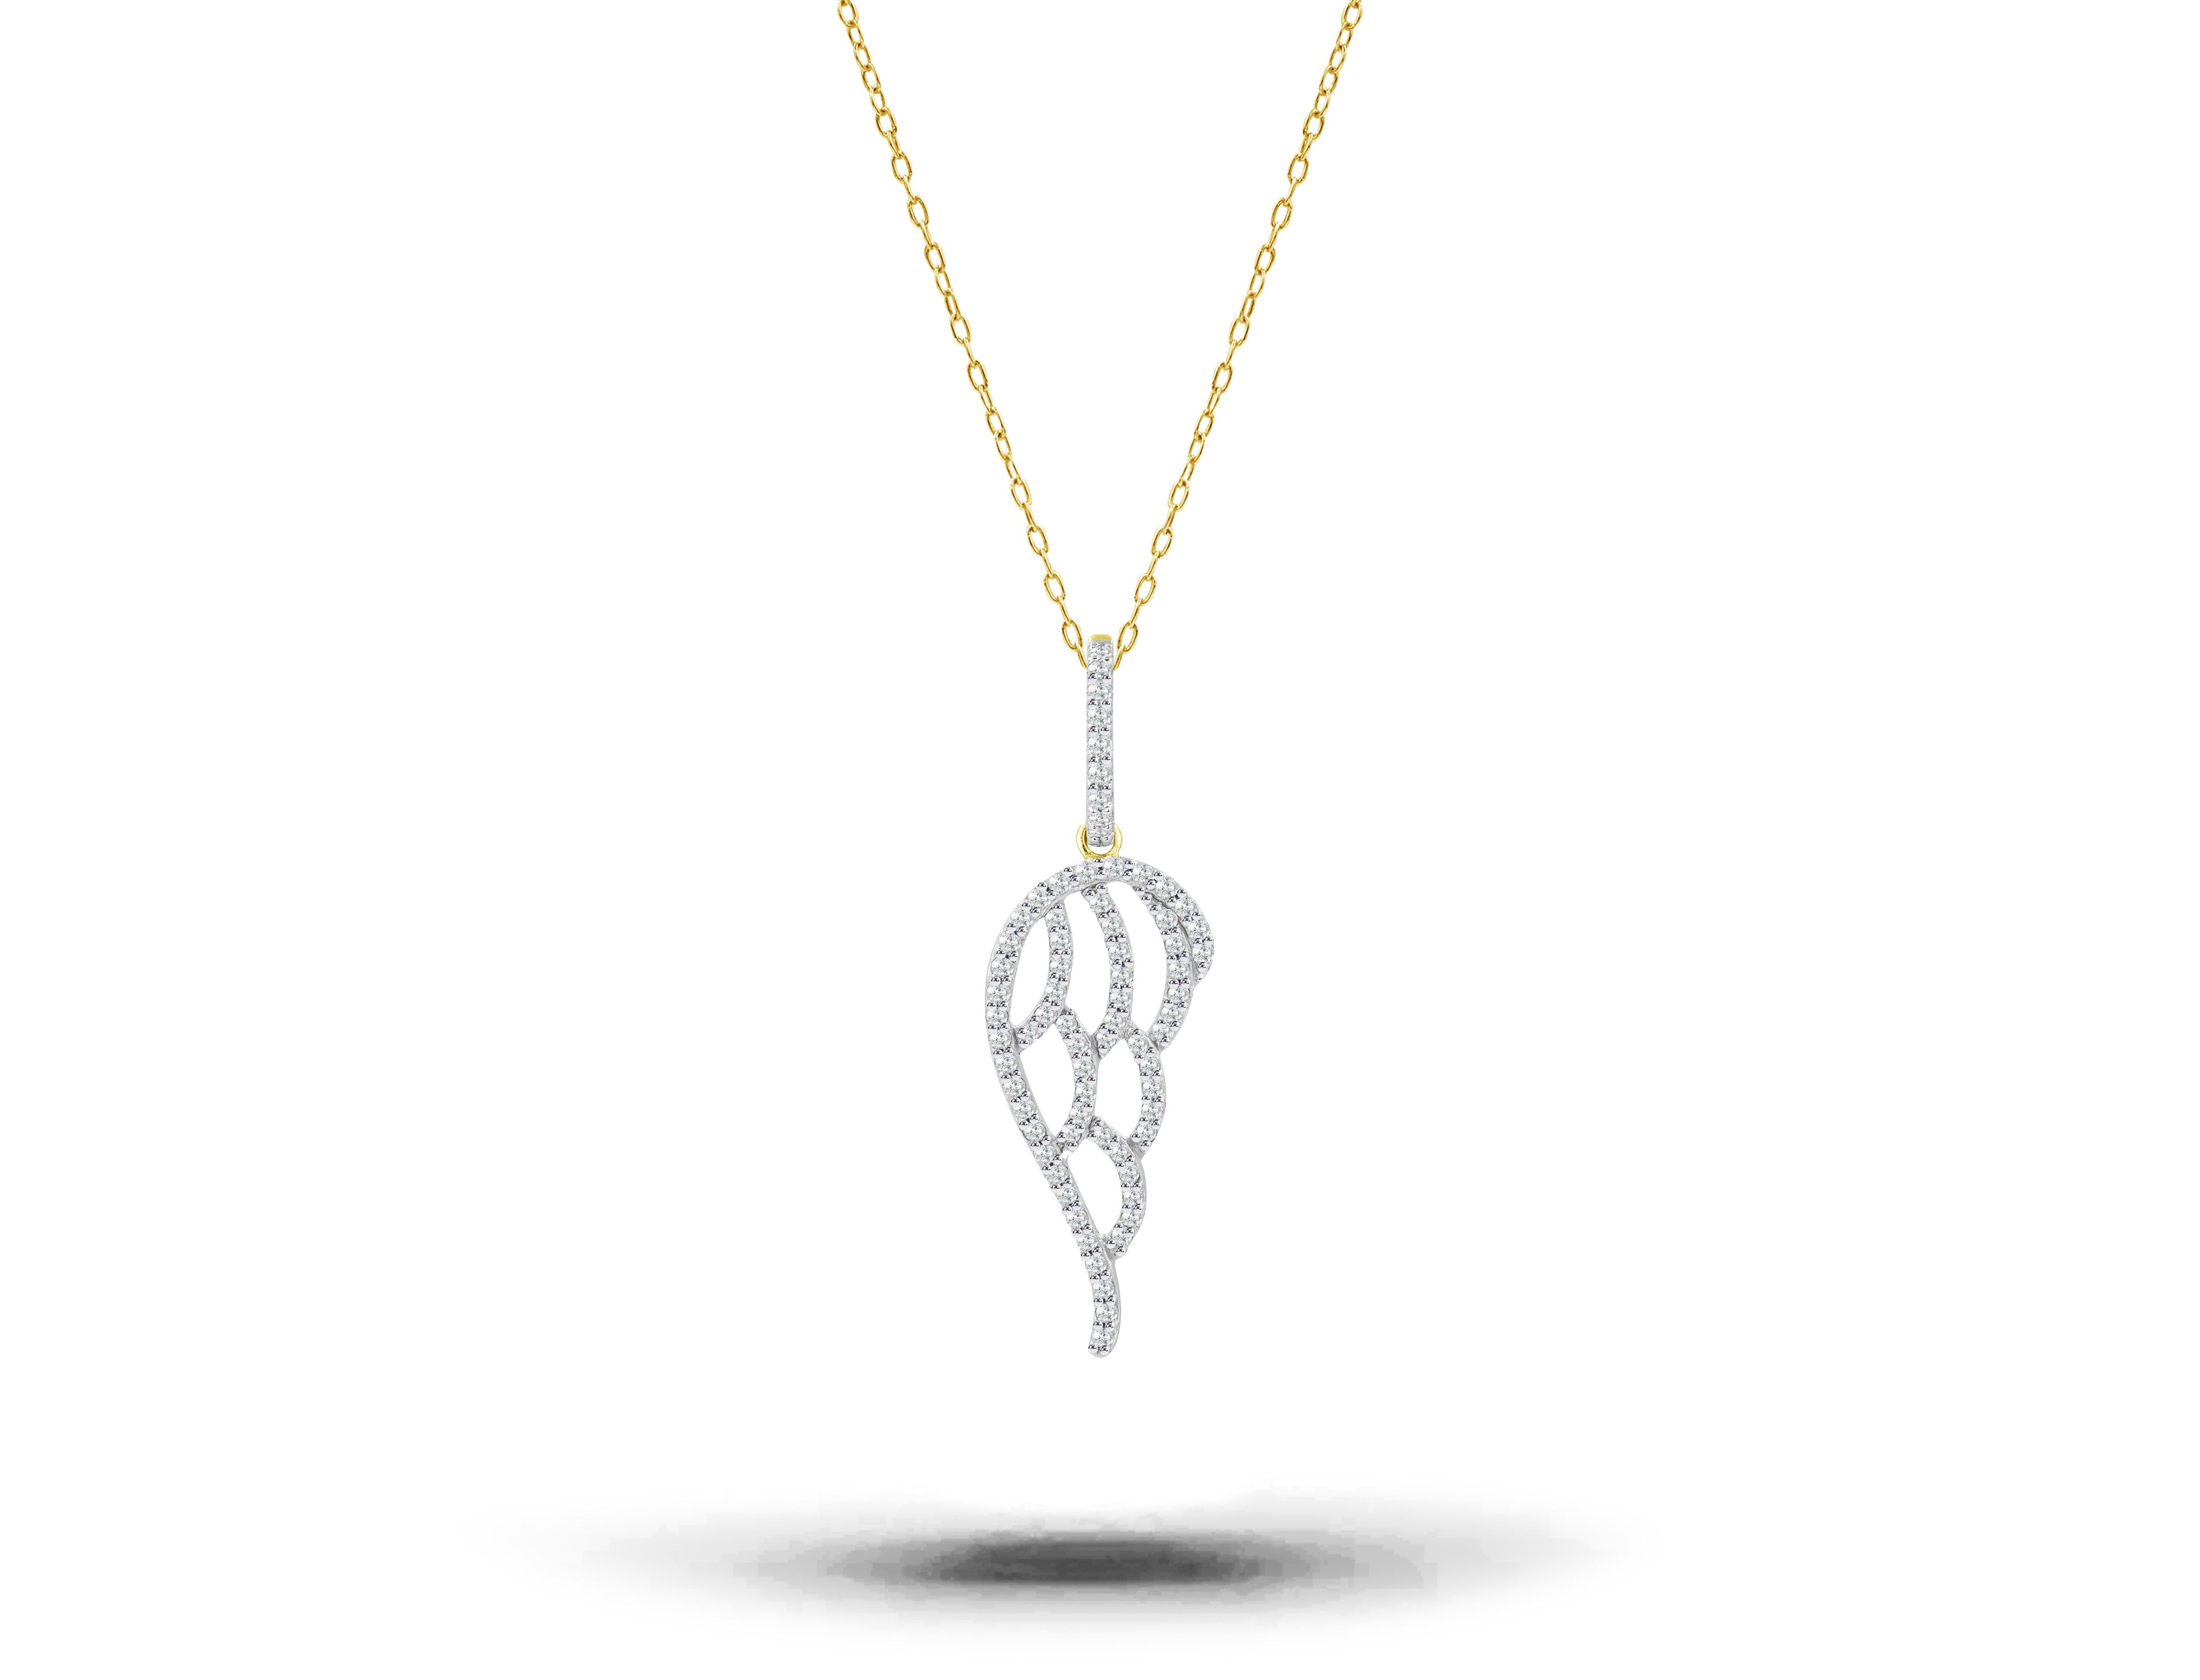 Diamond Angel Wing Necklace in 18K Rose Gold / White Gold / Yellow Gold.

A solid gold diamond Angel wings necklace is made with perfection of art. A Spiritual Protect gift for yourself or your loved ones. Genuine, natural diamonds & real solid gold